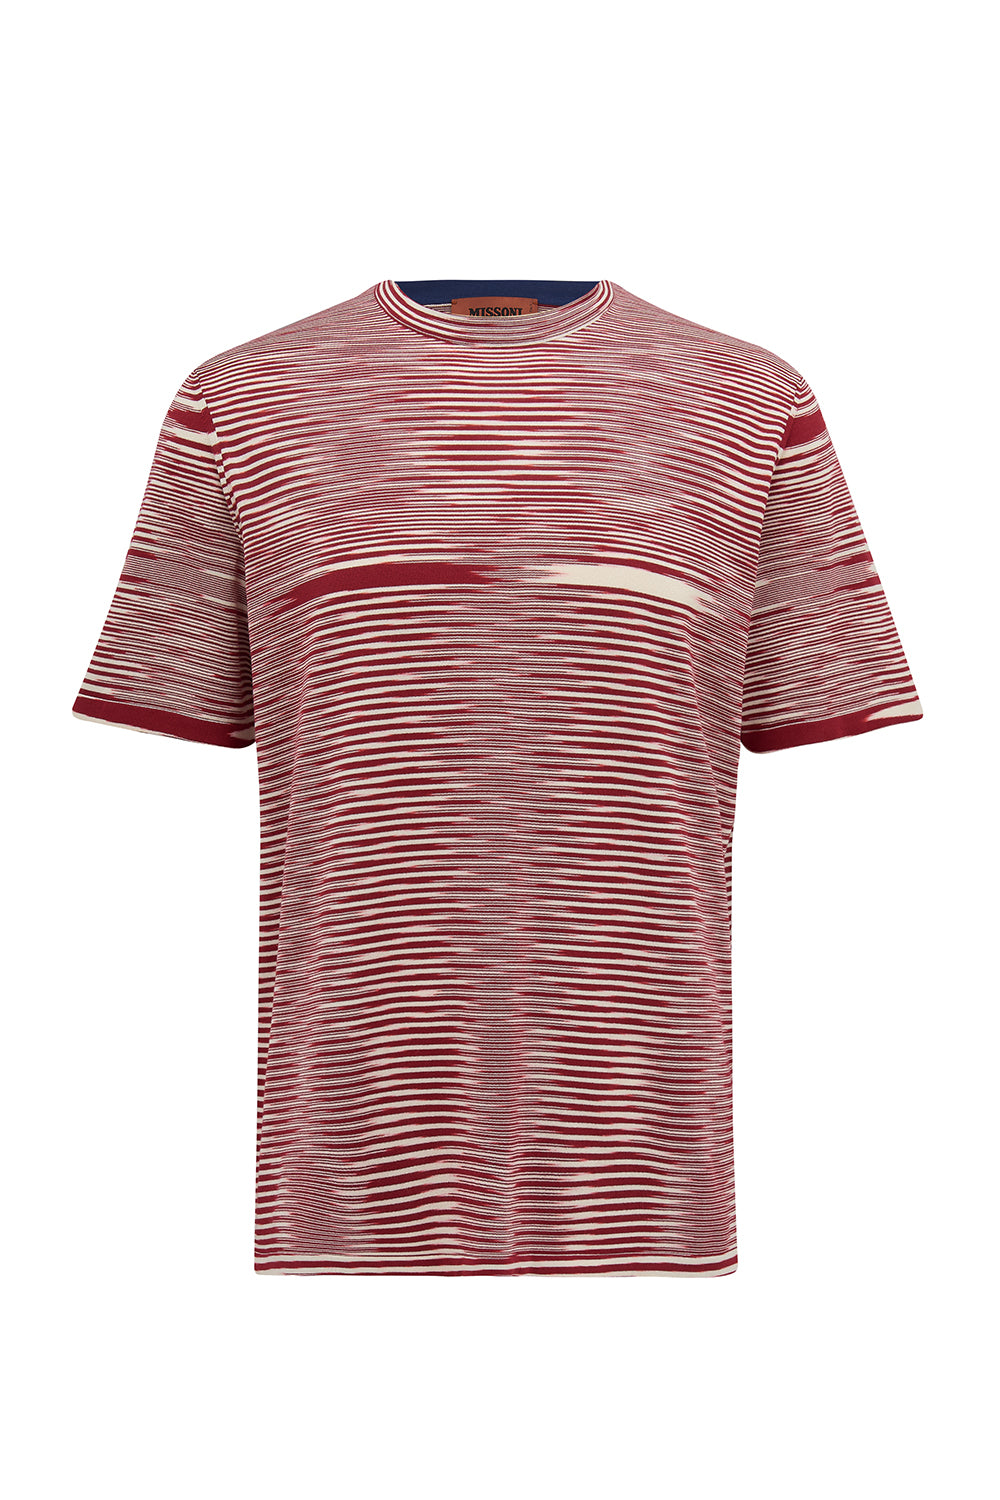 Missoni Men’s Space-dyed Stripe Top Red - Front View